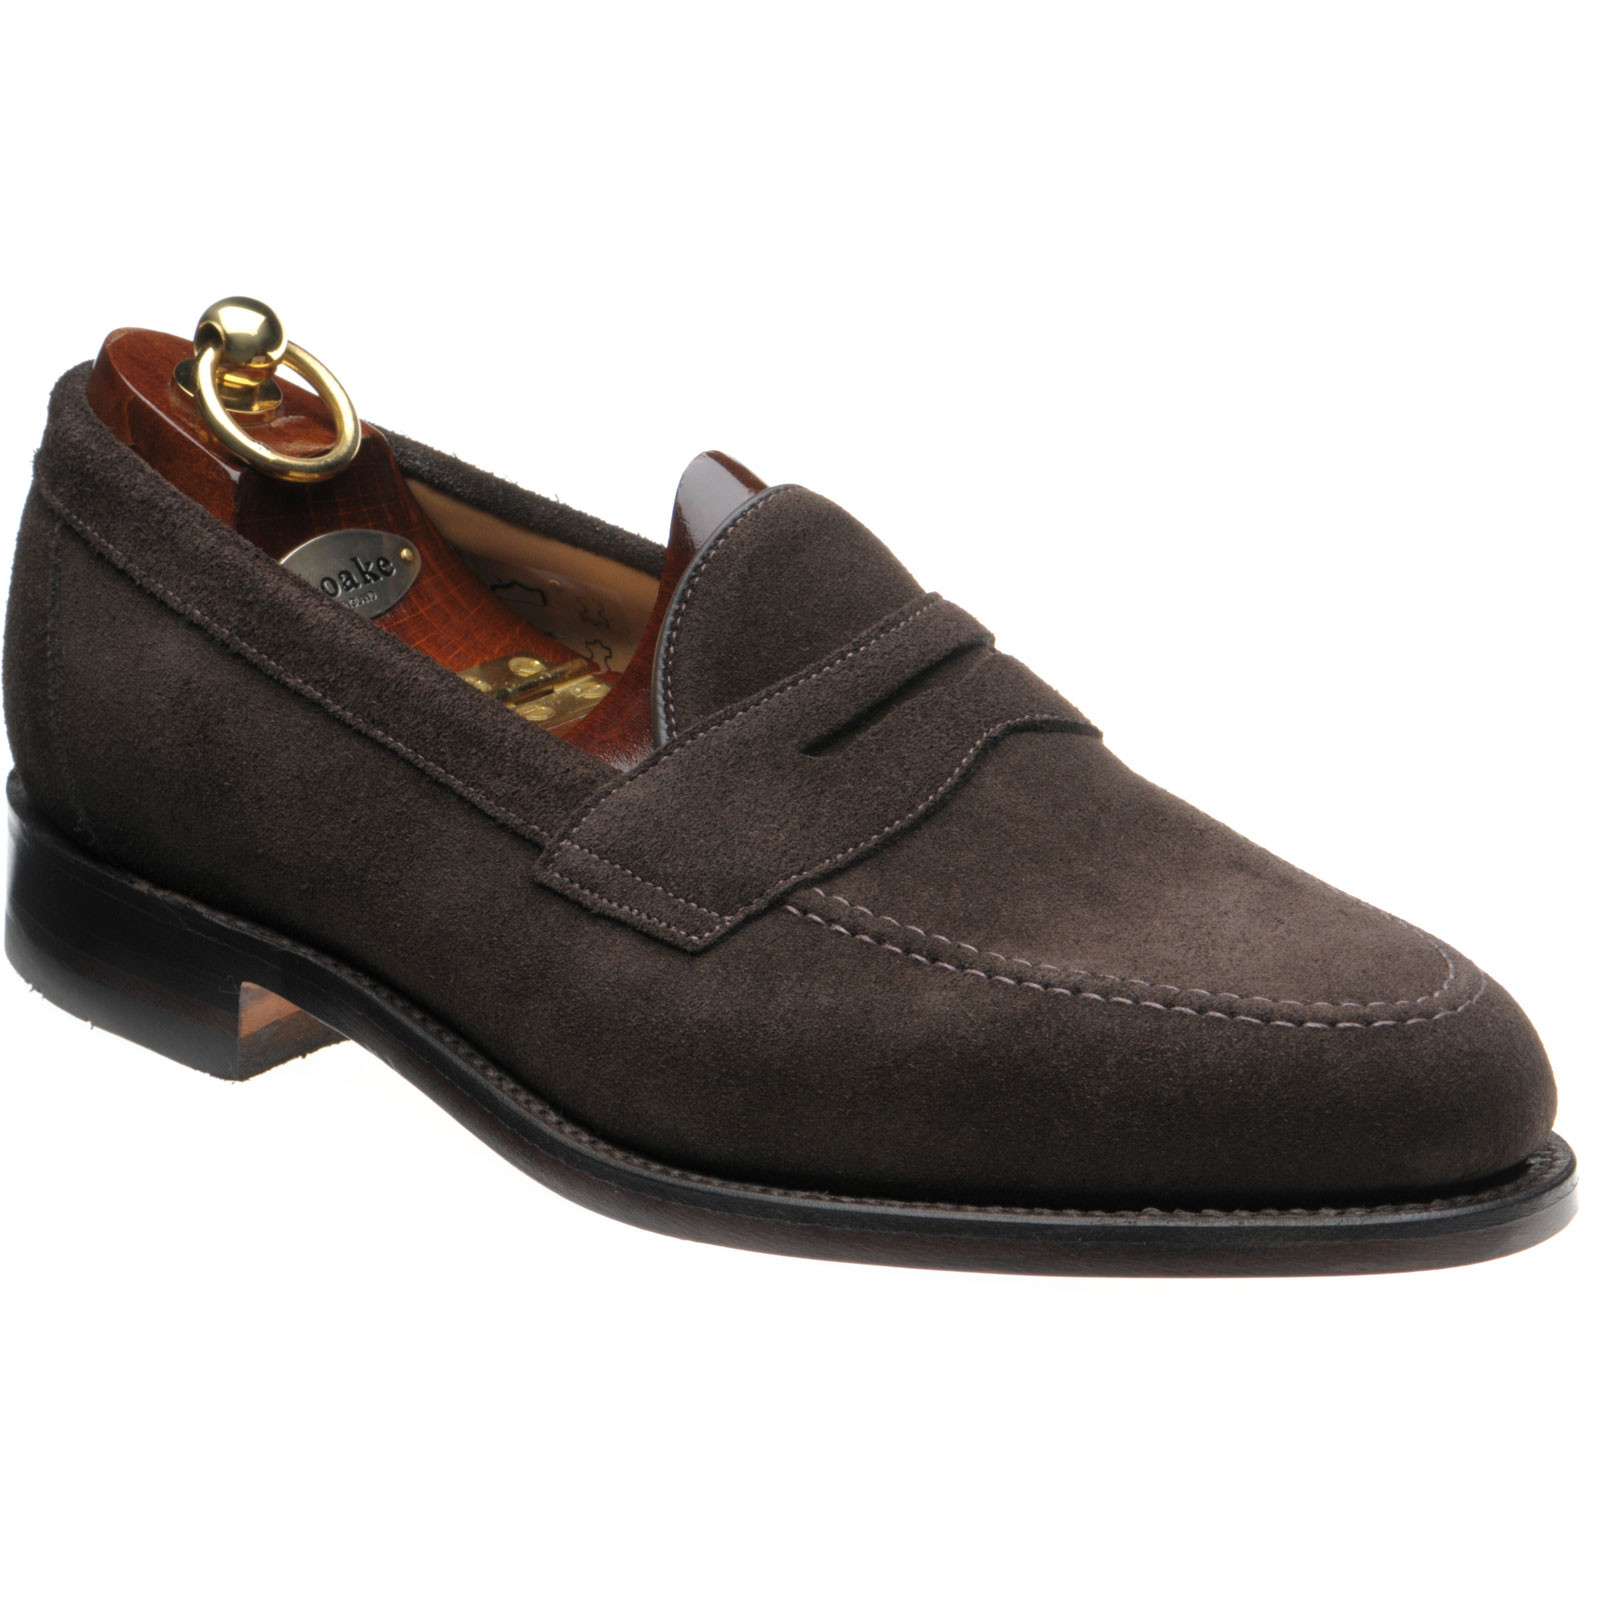 Loake shoes | Loake Professional | Imperial loafers in Dark Brown Suede ...